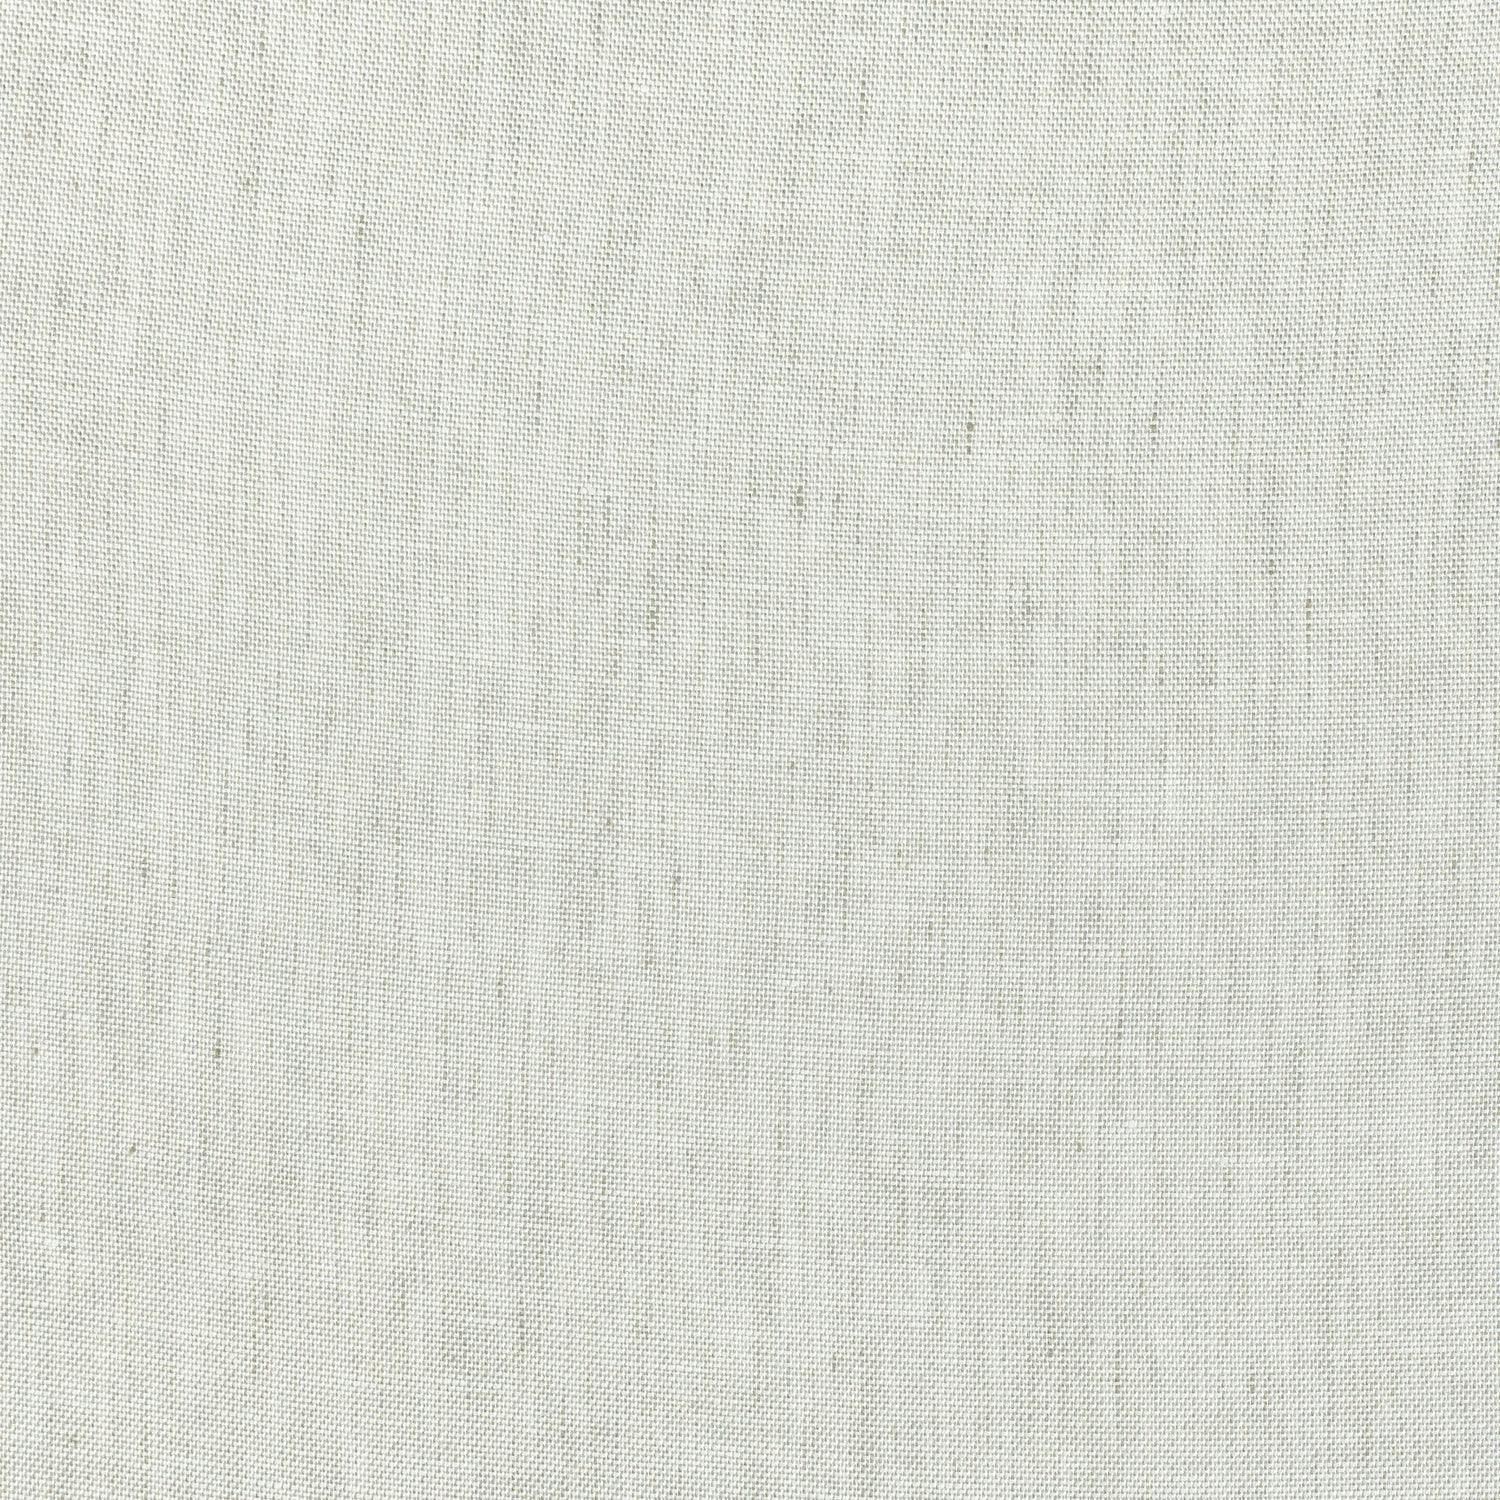 Skye Linen fabric in stone color - pattern number FWW7601 - by Thibaut in the Palisades collection